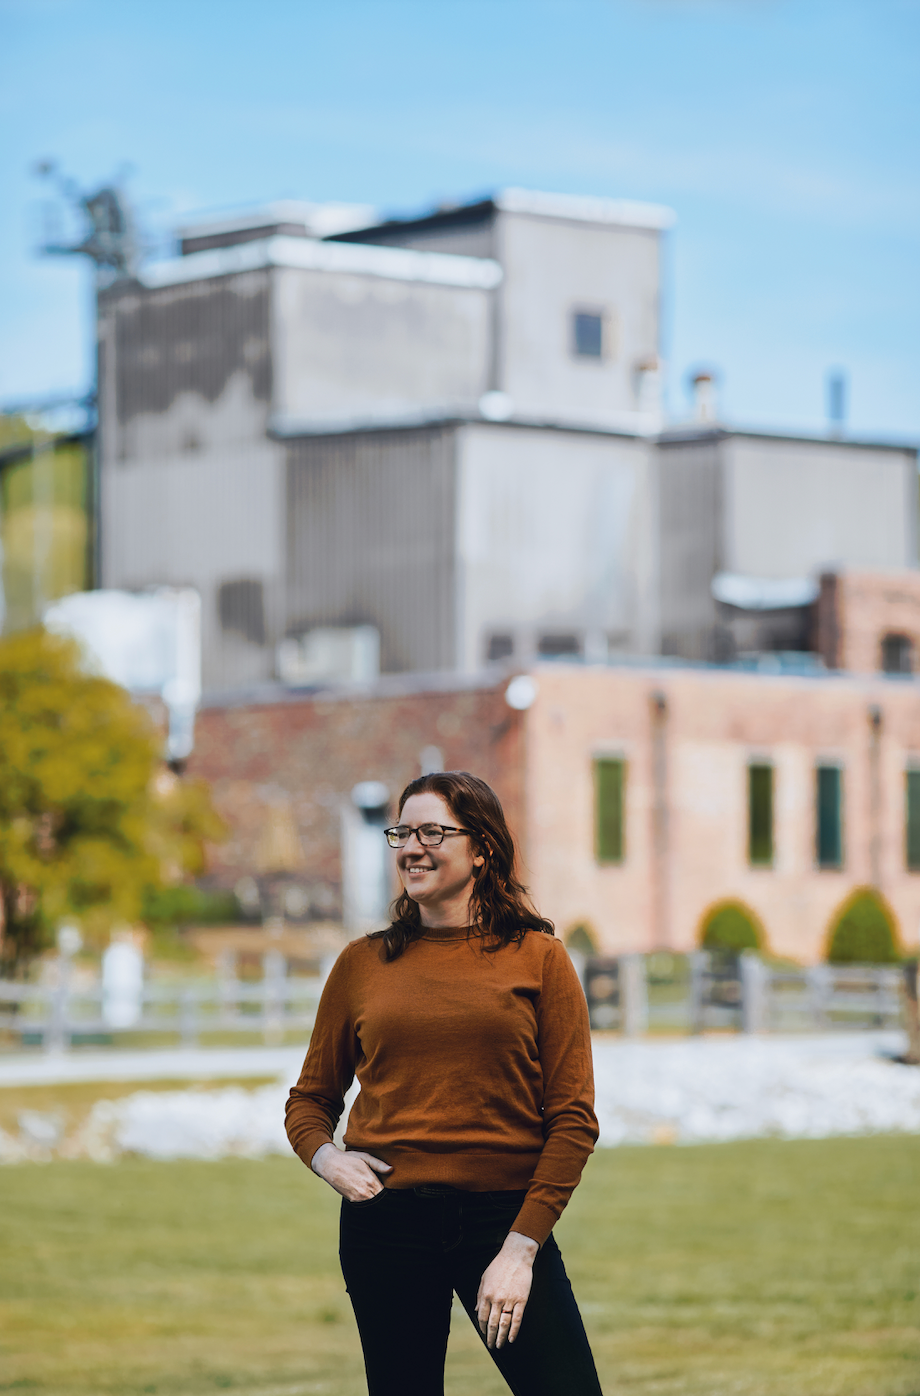 Nicole Austin joined George Dickel in 2018 as general manager and distiller.